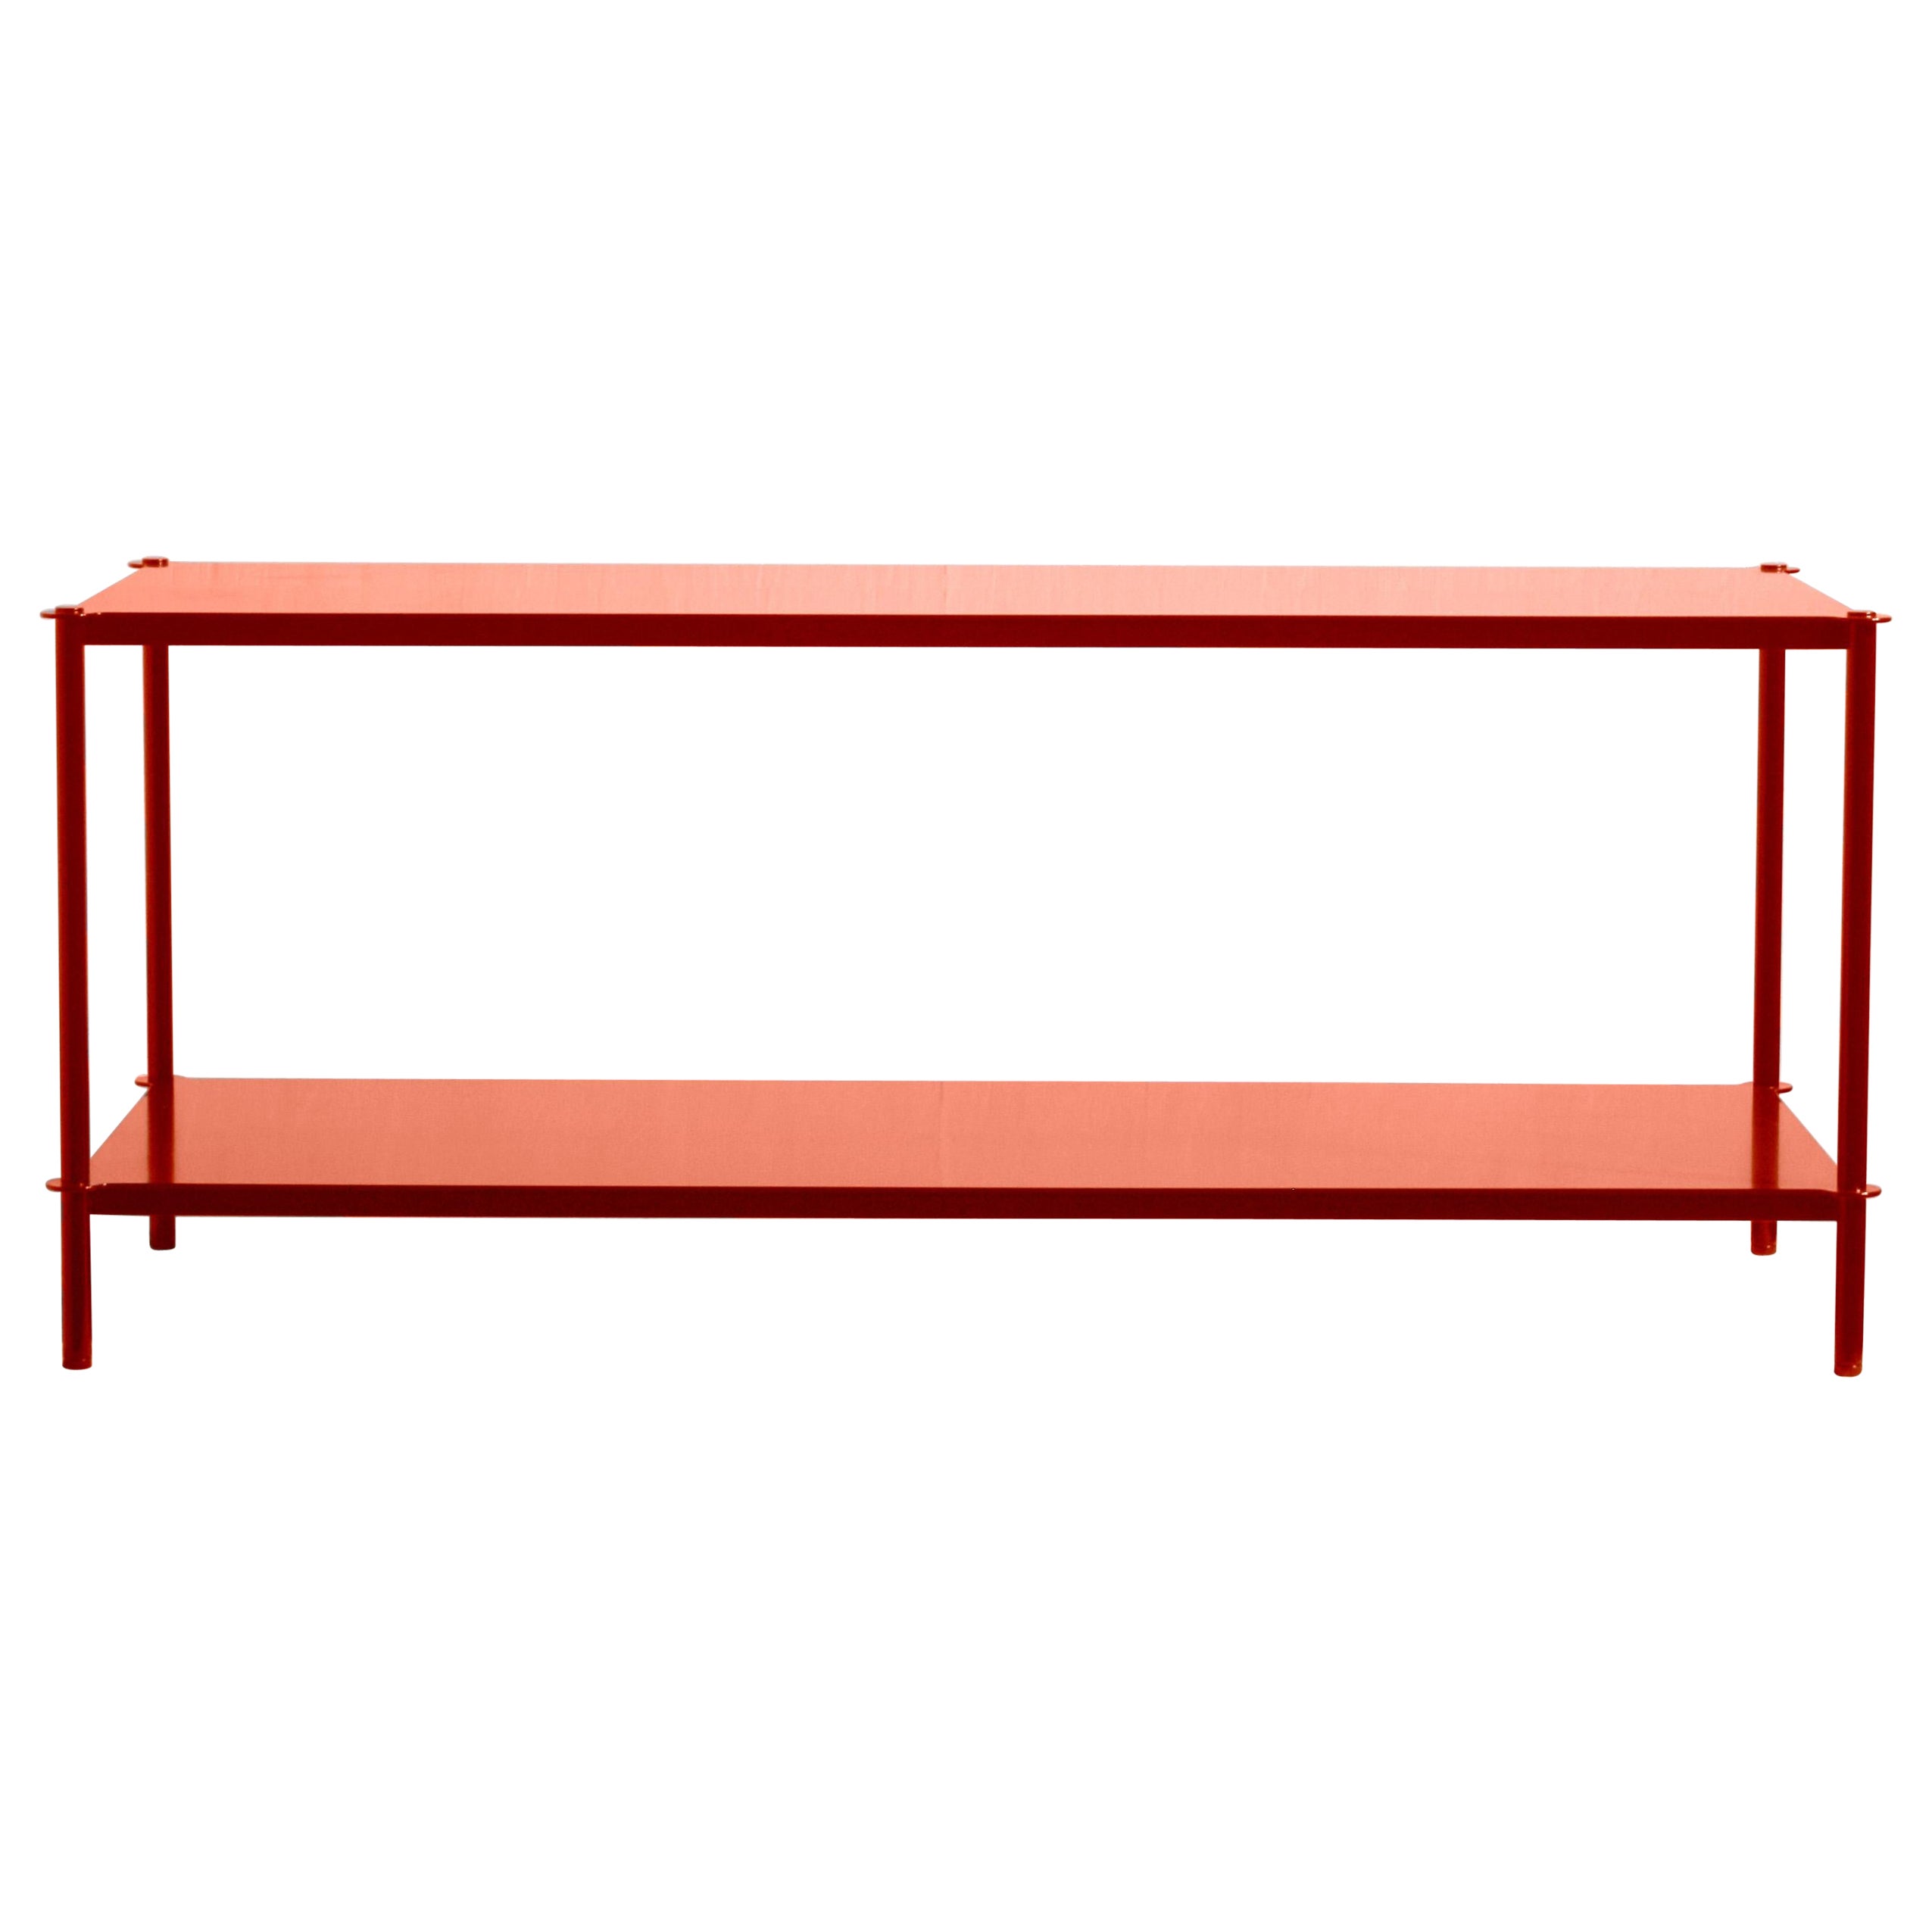 Mezzo (48") Shelving in Powder Coated Salmon Metal by Laylo Studio For Sale